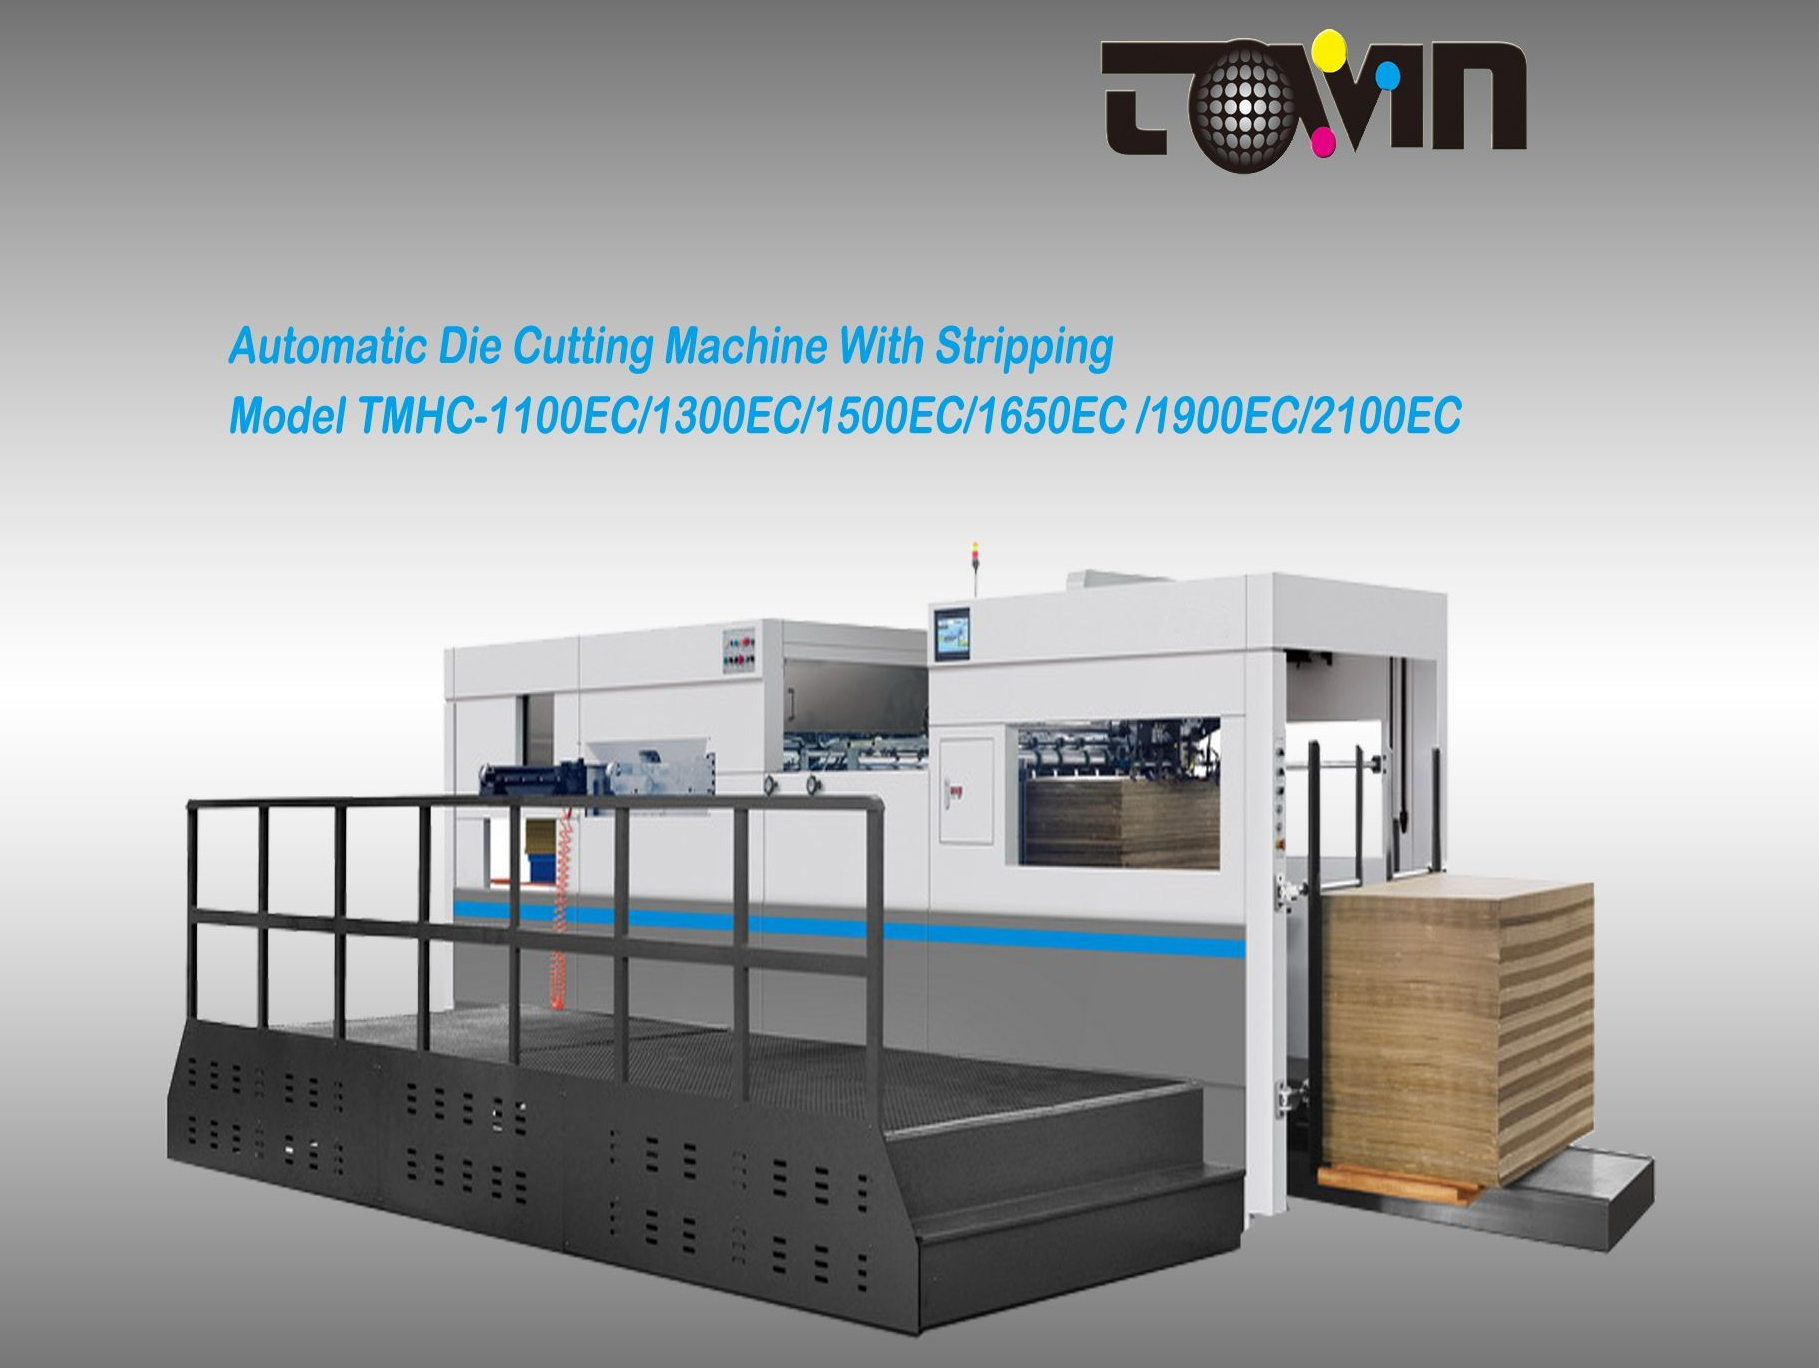 Automatic Die Cutting Machine With Stripping